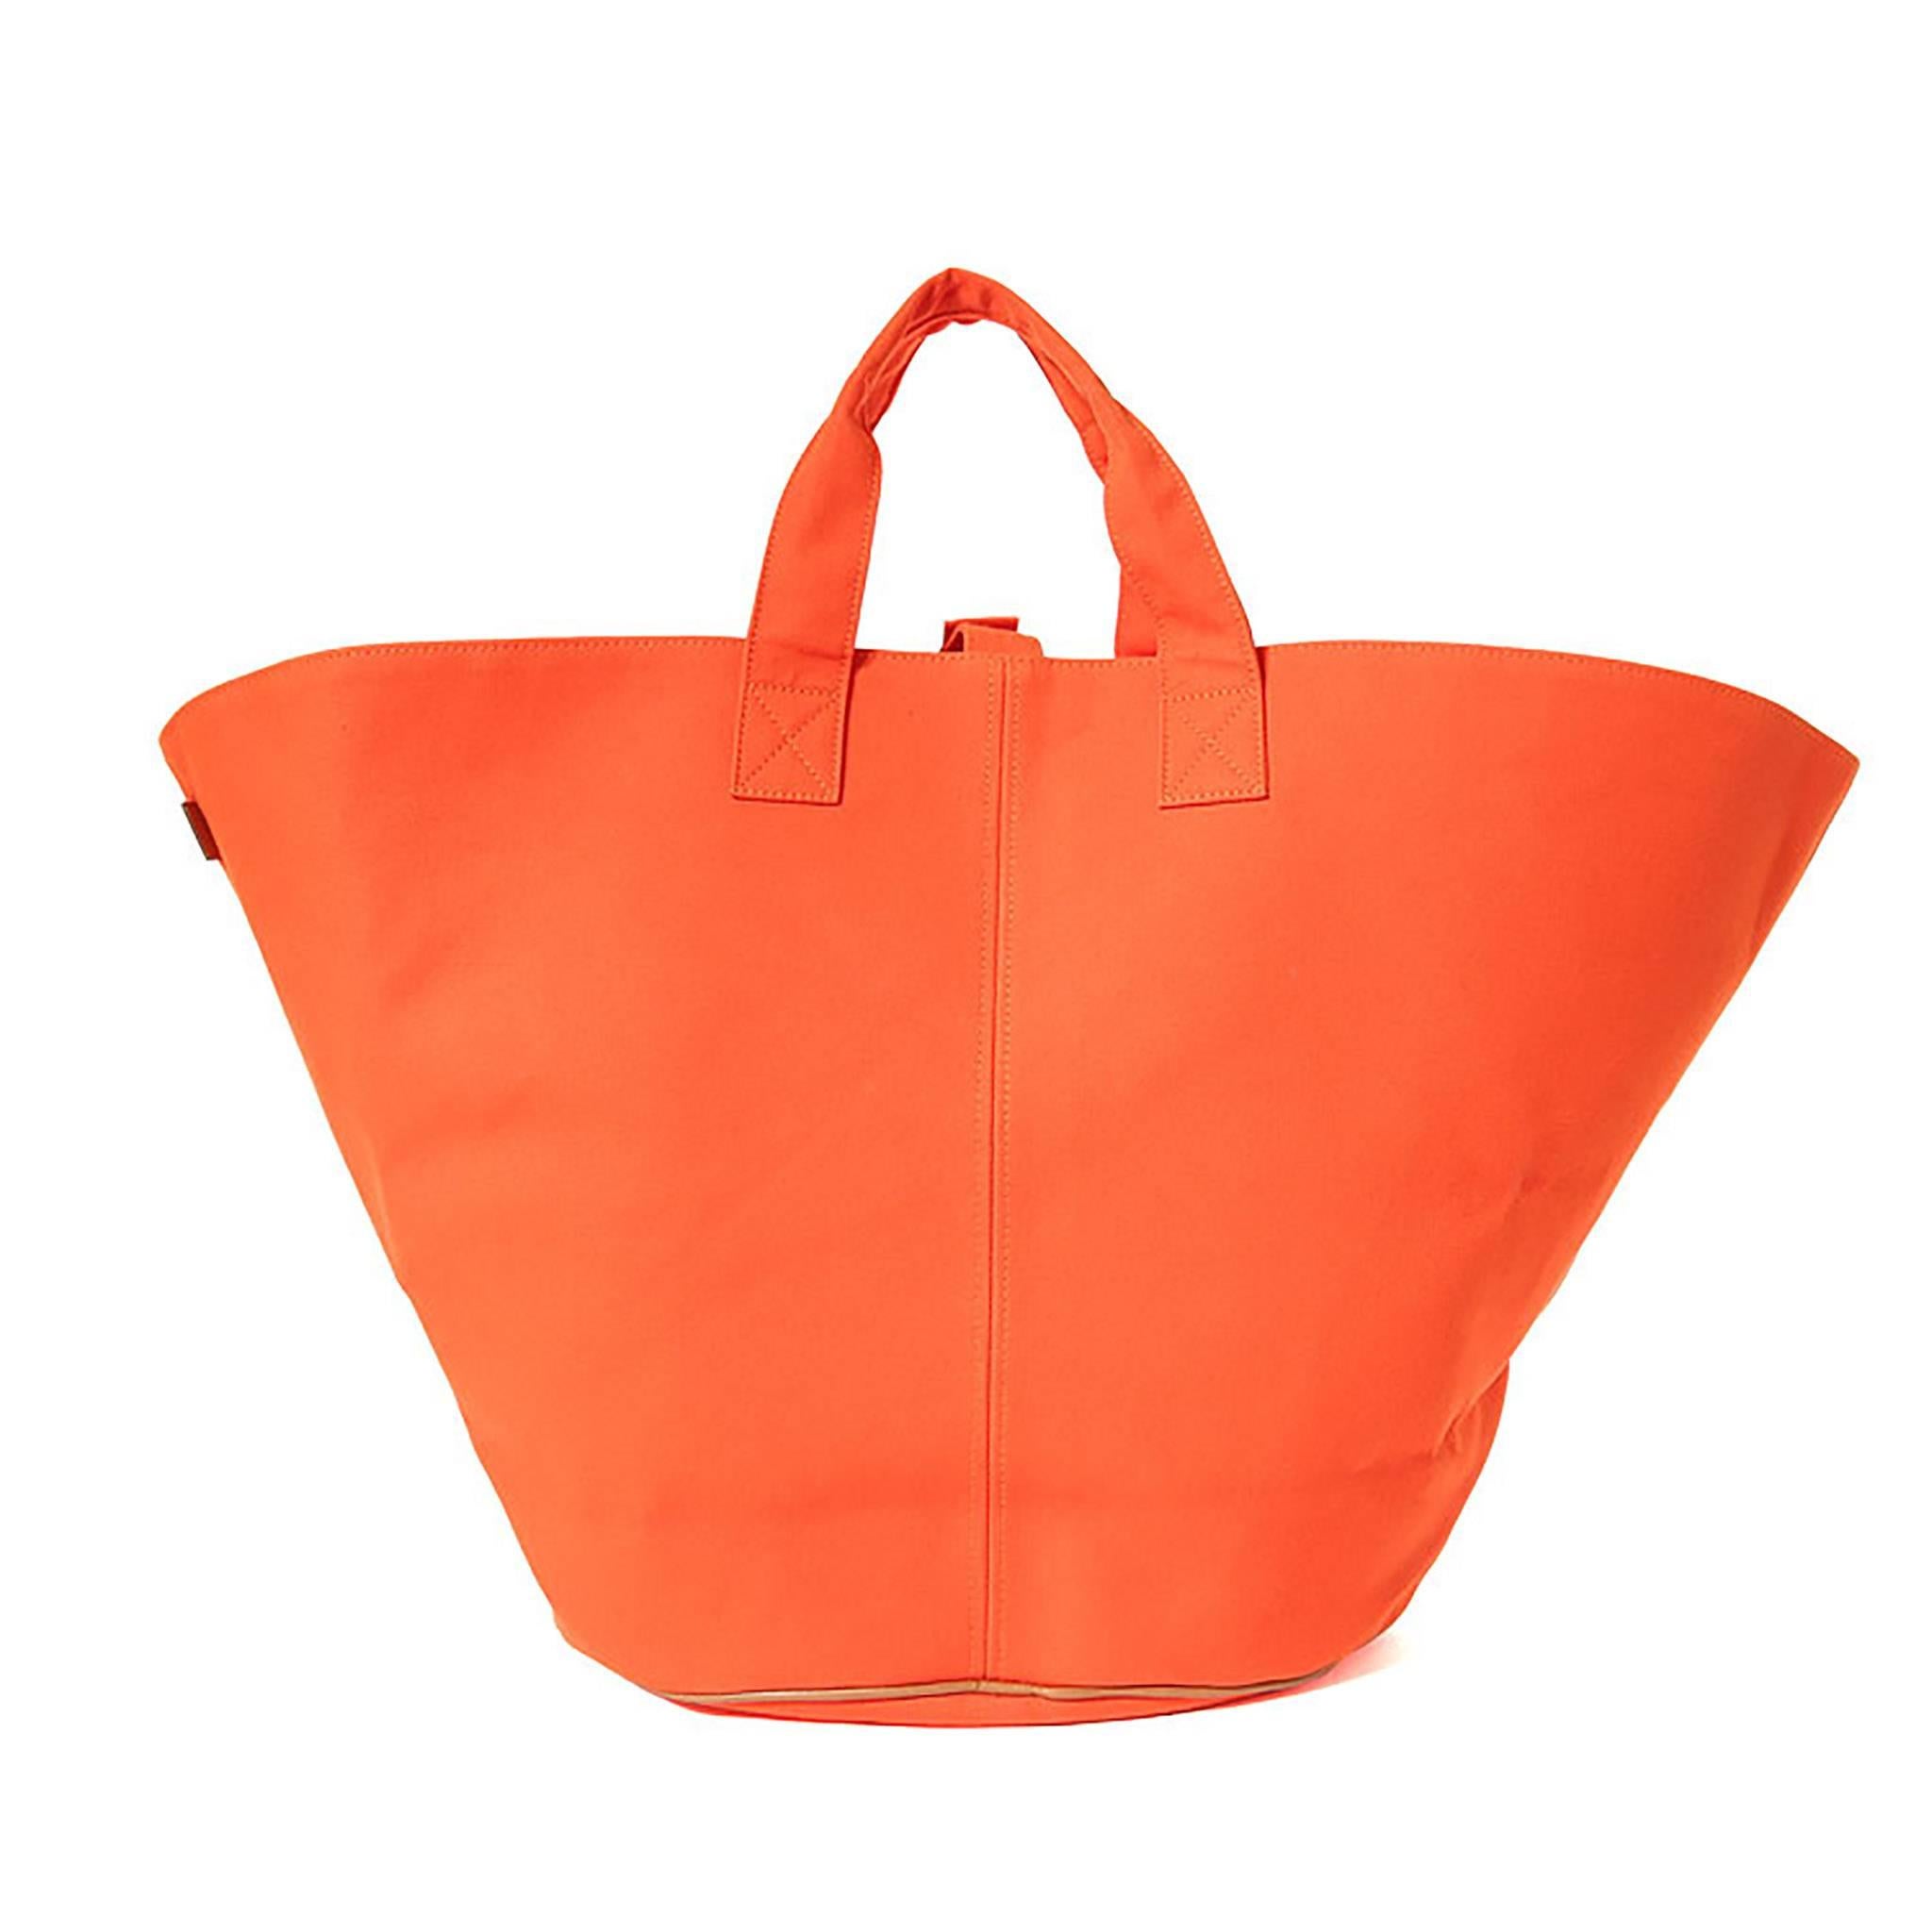 Hermes Canvas Shopping Bag Orange

Pristine condition. Pre-owned and never used

Model: Canvas

Color: Orange

Hardware: None

Measures: 21.25 x 6.69 x 12.20 inch / 54 x 17 x 31 cm

Details:

*Protective felt removed for purposes of photography